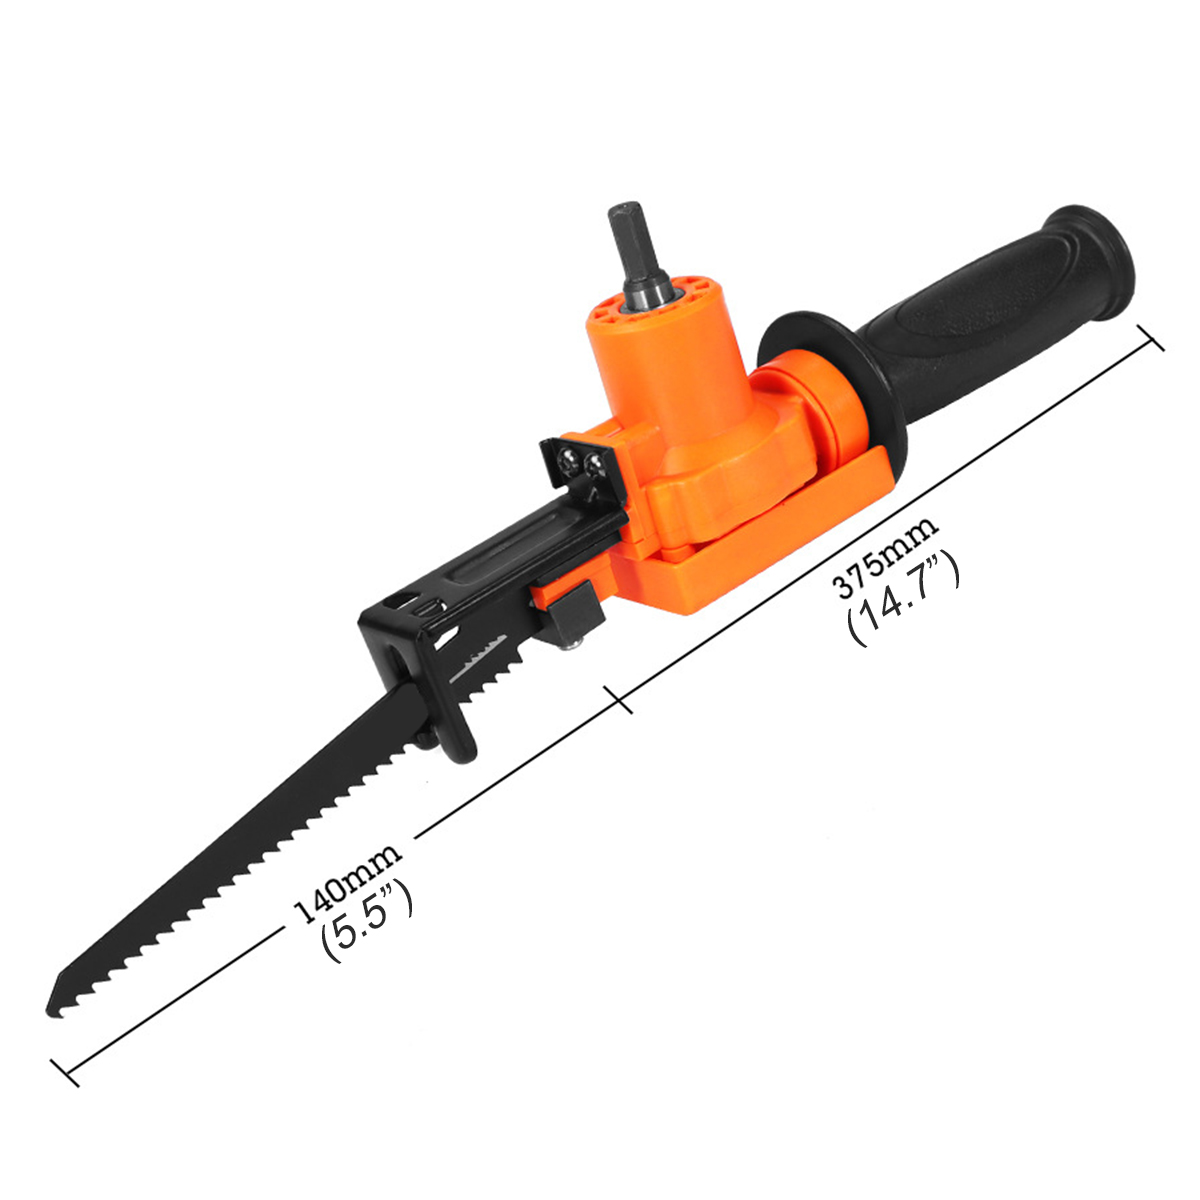 Reciprocating-Saw-Attachment-Adapter-Change-Electric-Drill-Into-Reciprocating-Saw-for-Wood-Metal-Cut-1725363-3